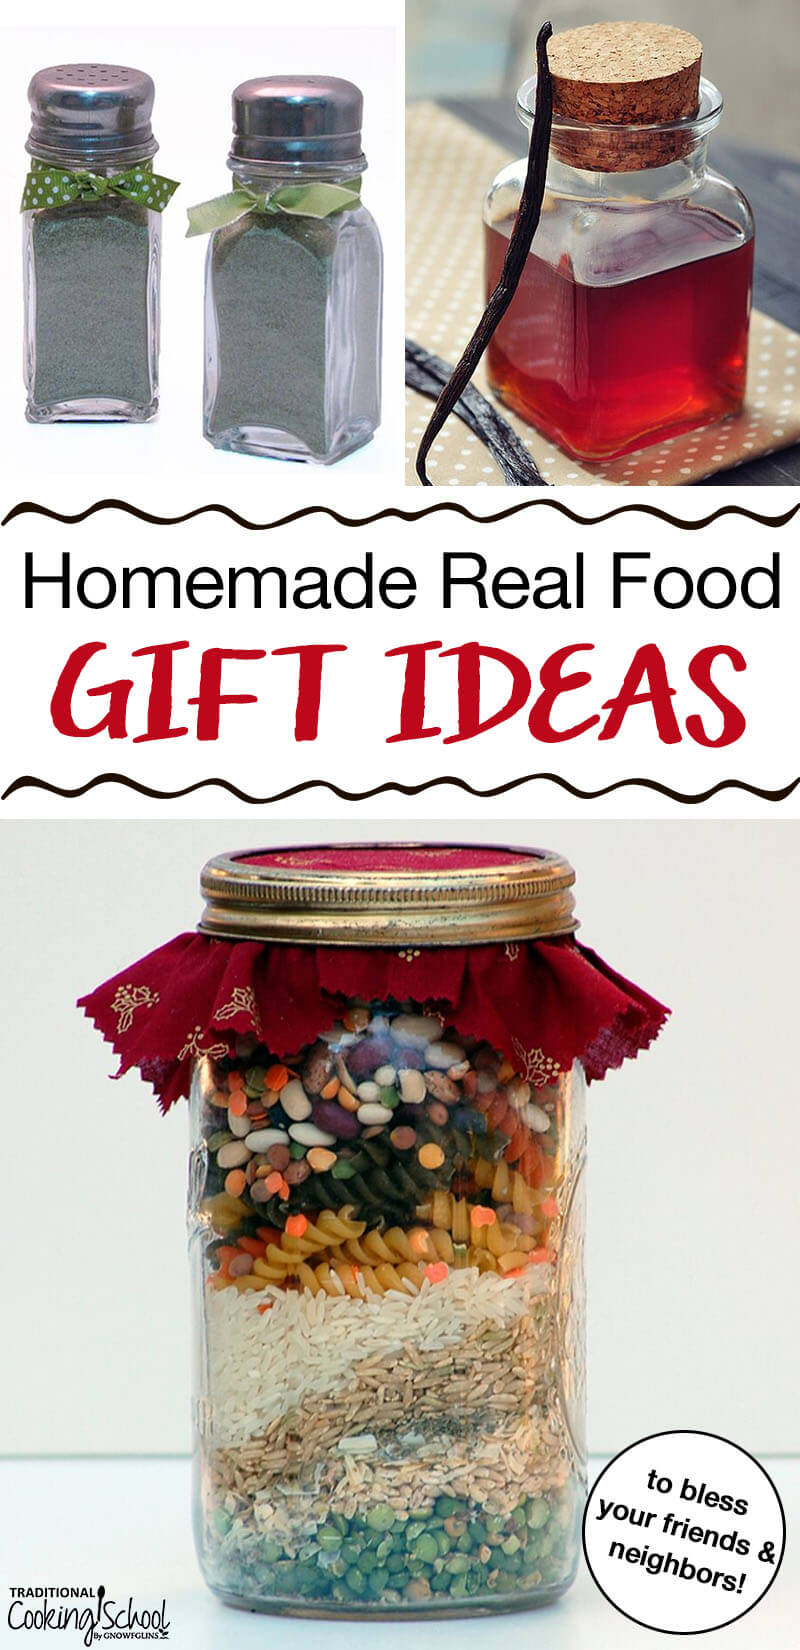 These are real food gifts that specifically provide for a need or hearken to a greater gift than just the gift itself. The gifts are a thoughtful ministry to honor and care for the deeper physical and emotional needs of our friends and neighbors. | TraditionalCookingSchool.com